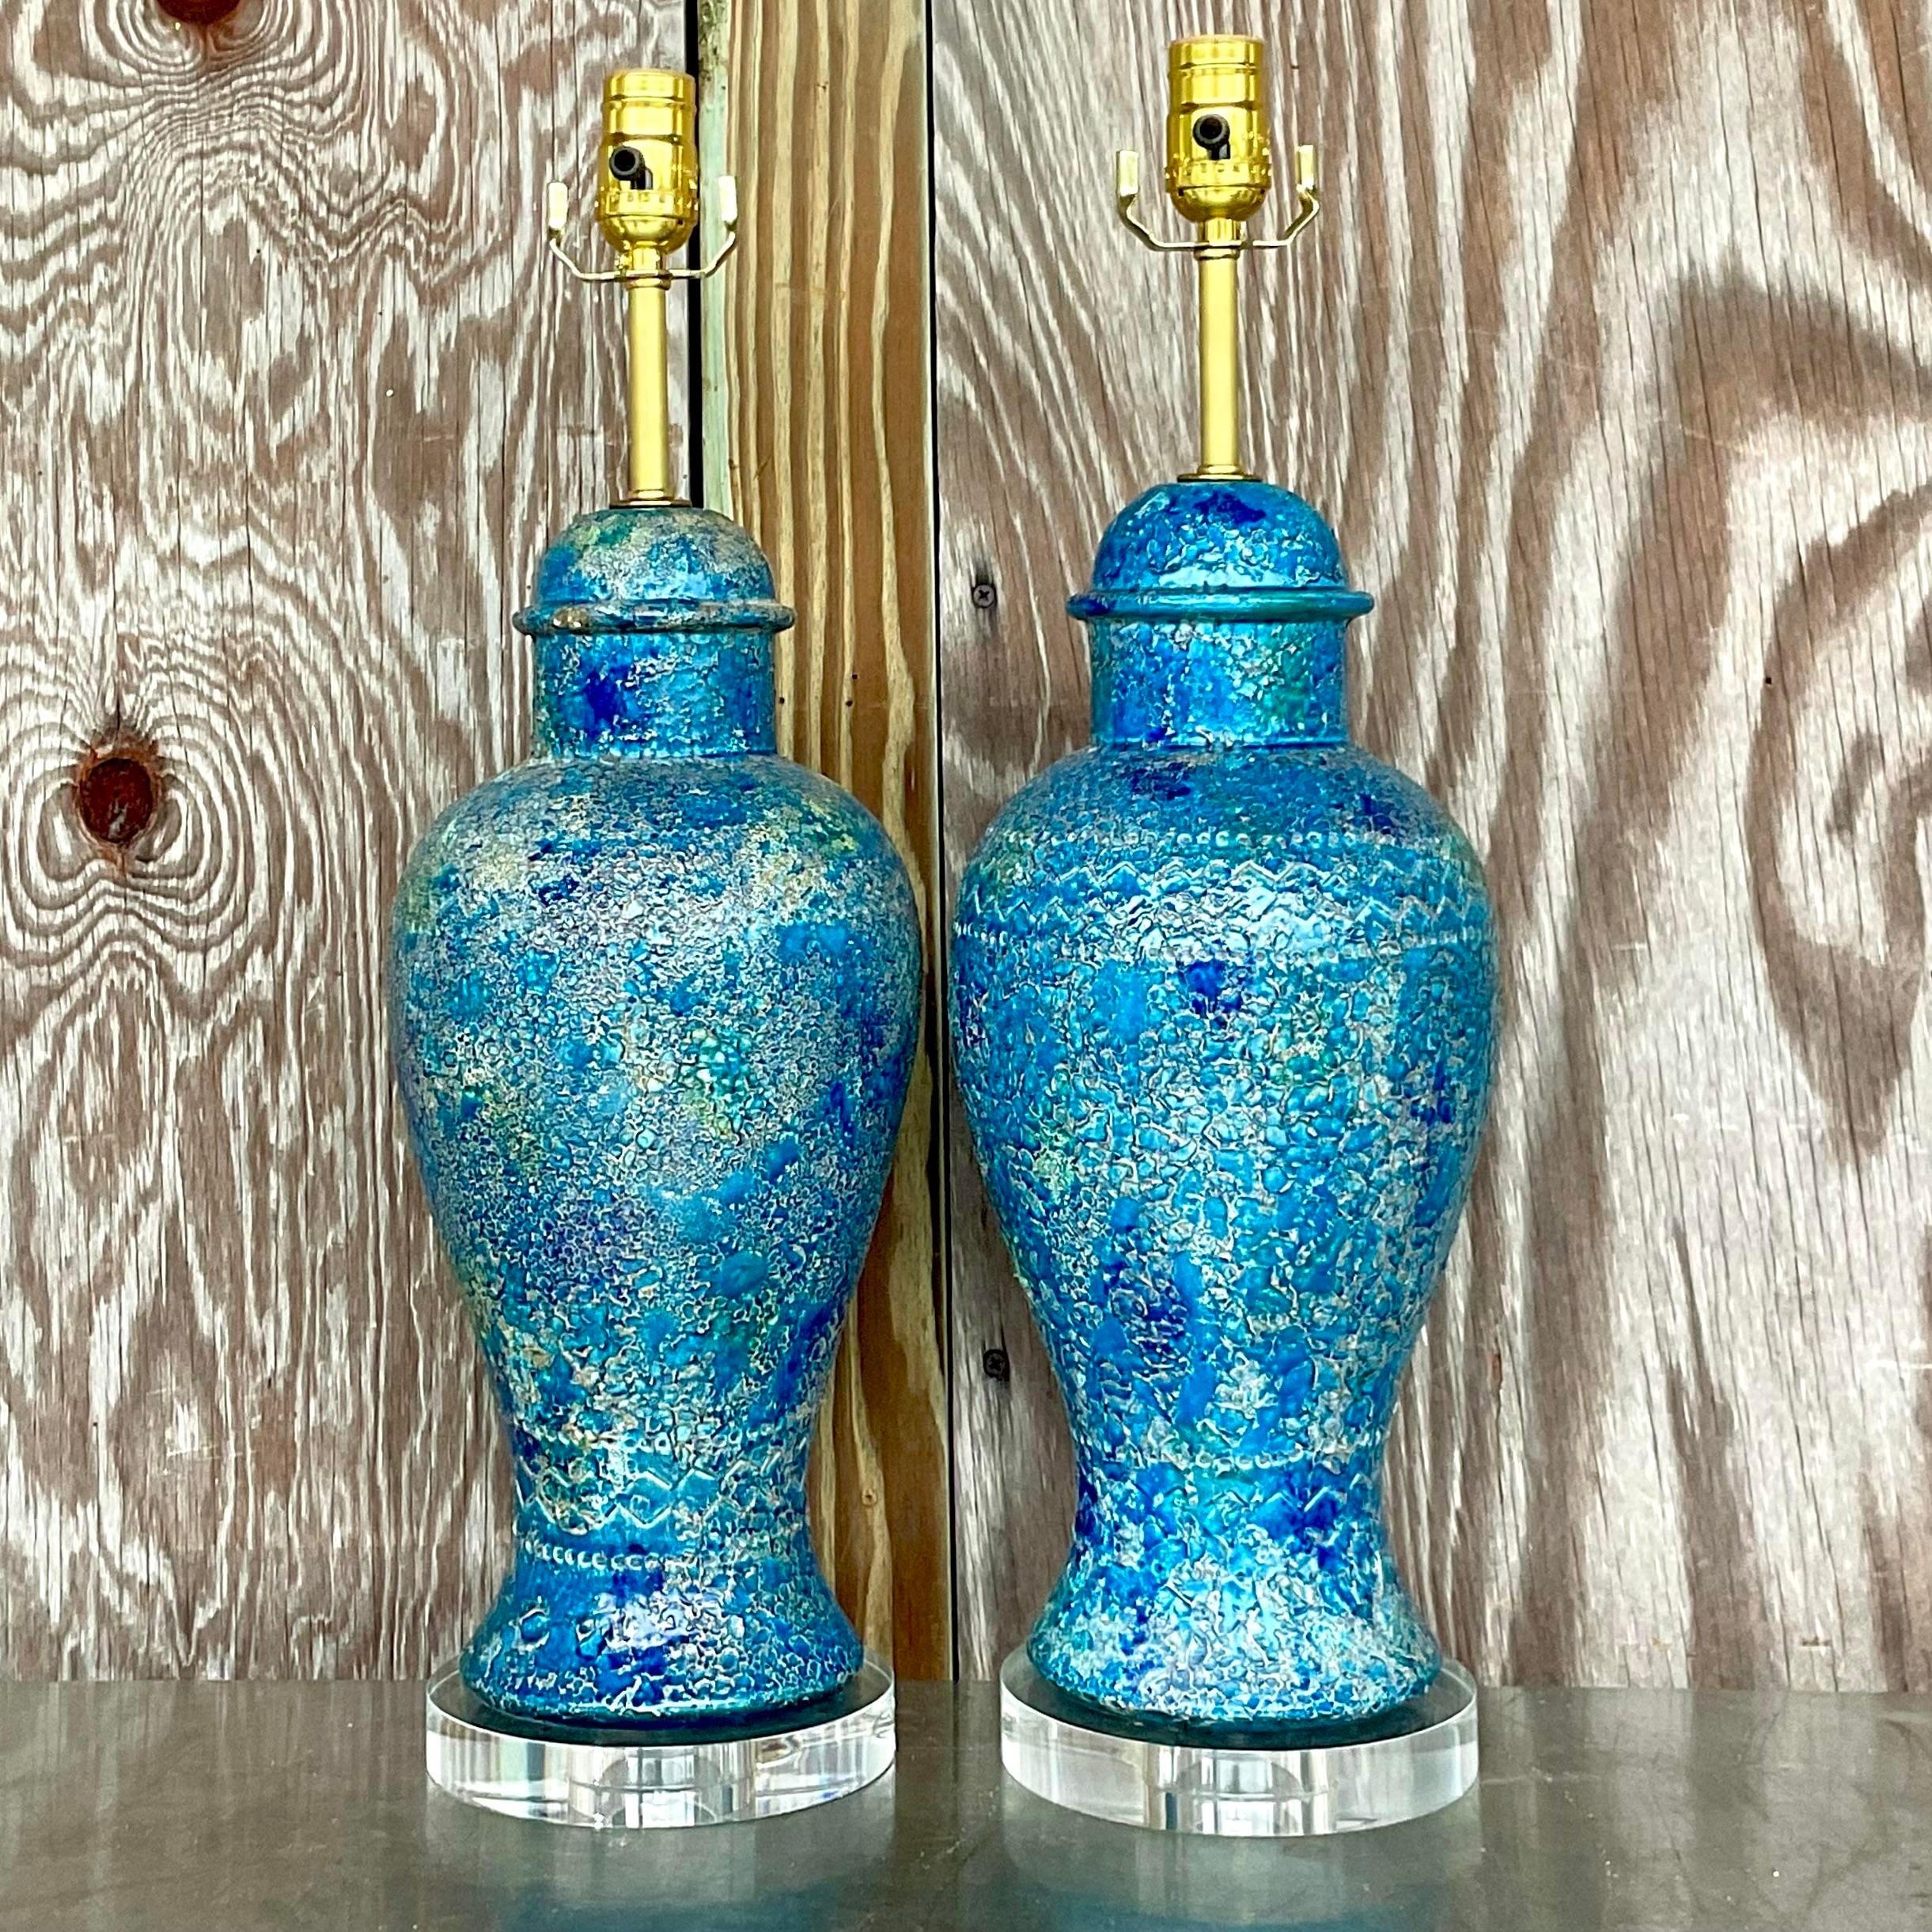 A fabulous pair of vintage Italian MCM table lamps. Made by the iconic Bitossi group for Raymor and signed on the bottom. Beautiful blue glazed ceramic with a lava finish. Fully restored with all new wiring, hardware and lucite plinths. Acquired